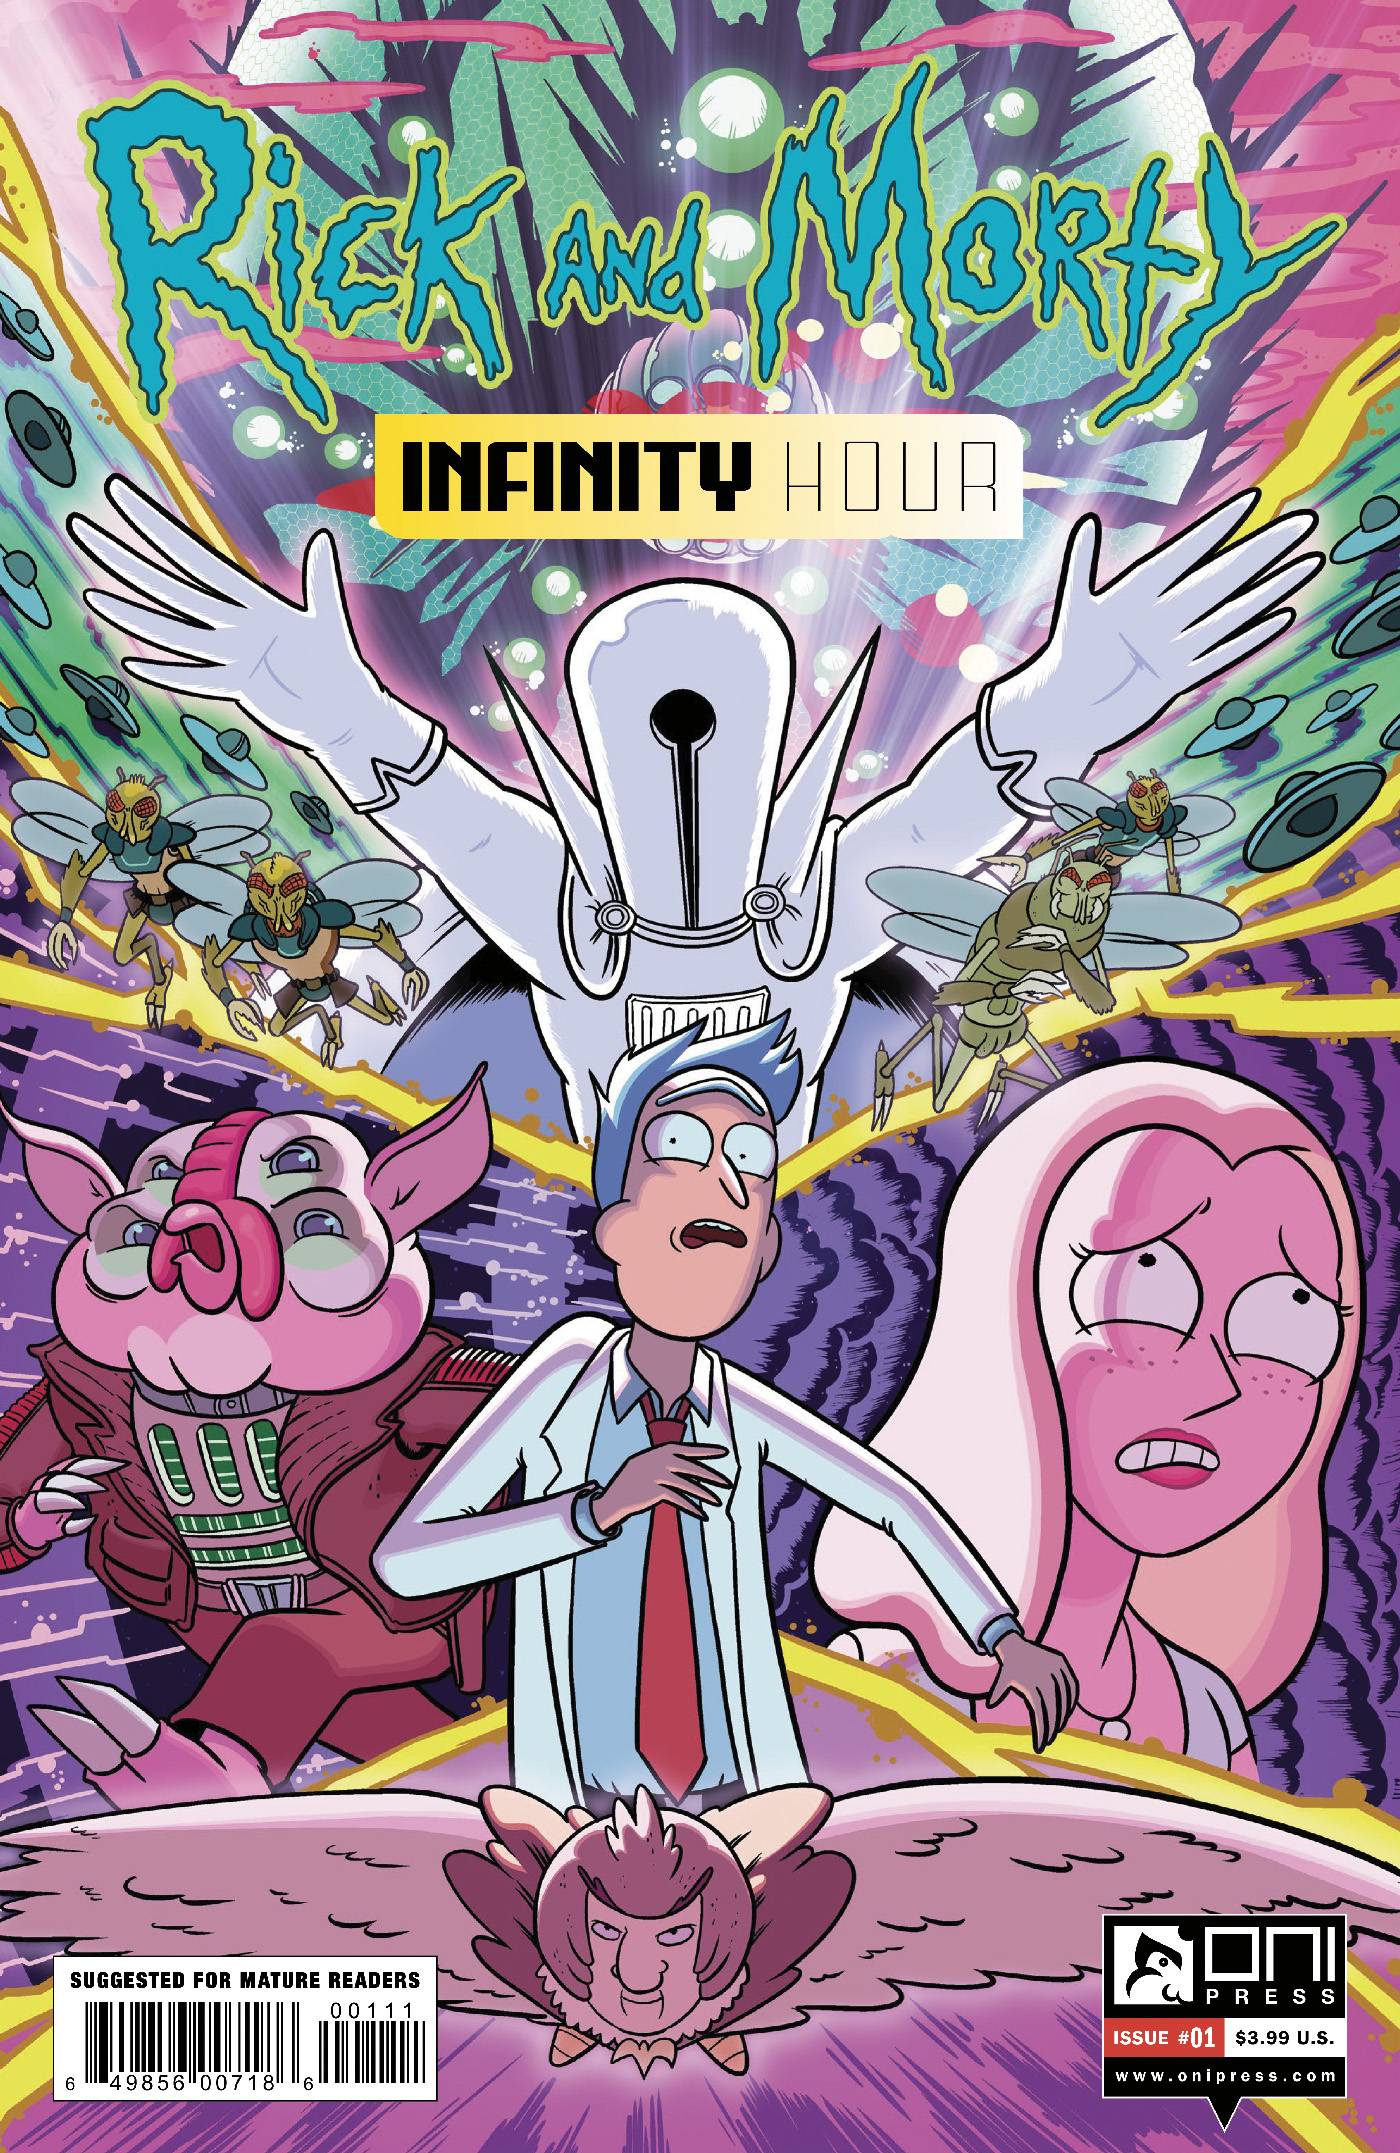 RICK AND MORTY INFINITY HOUR #1 CVR A ELLERBY